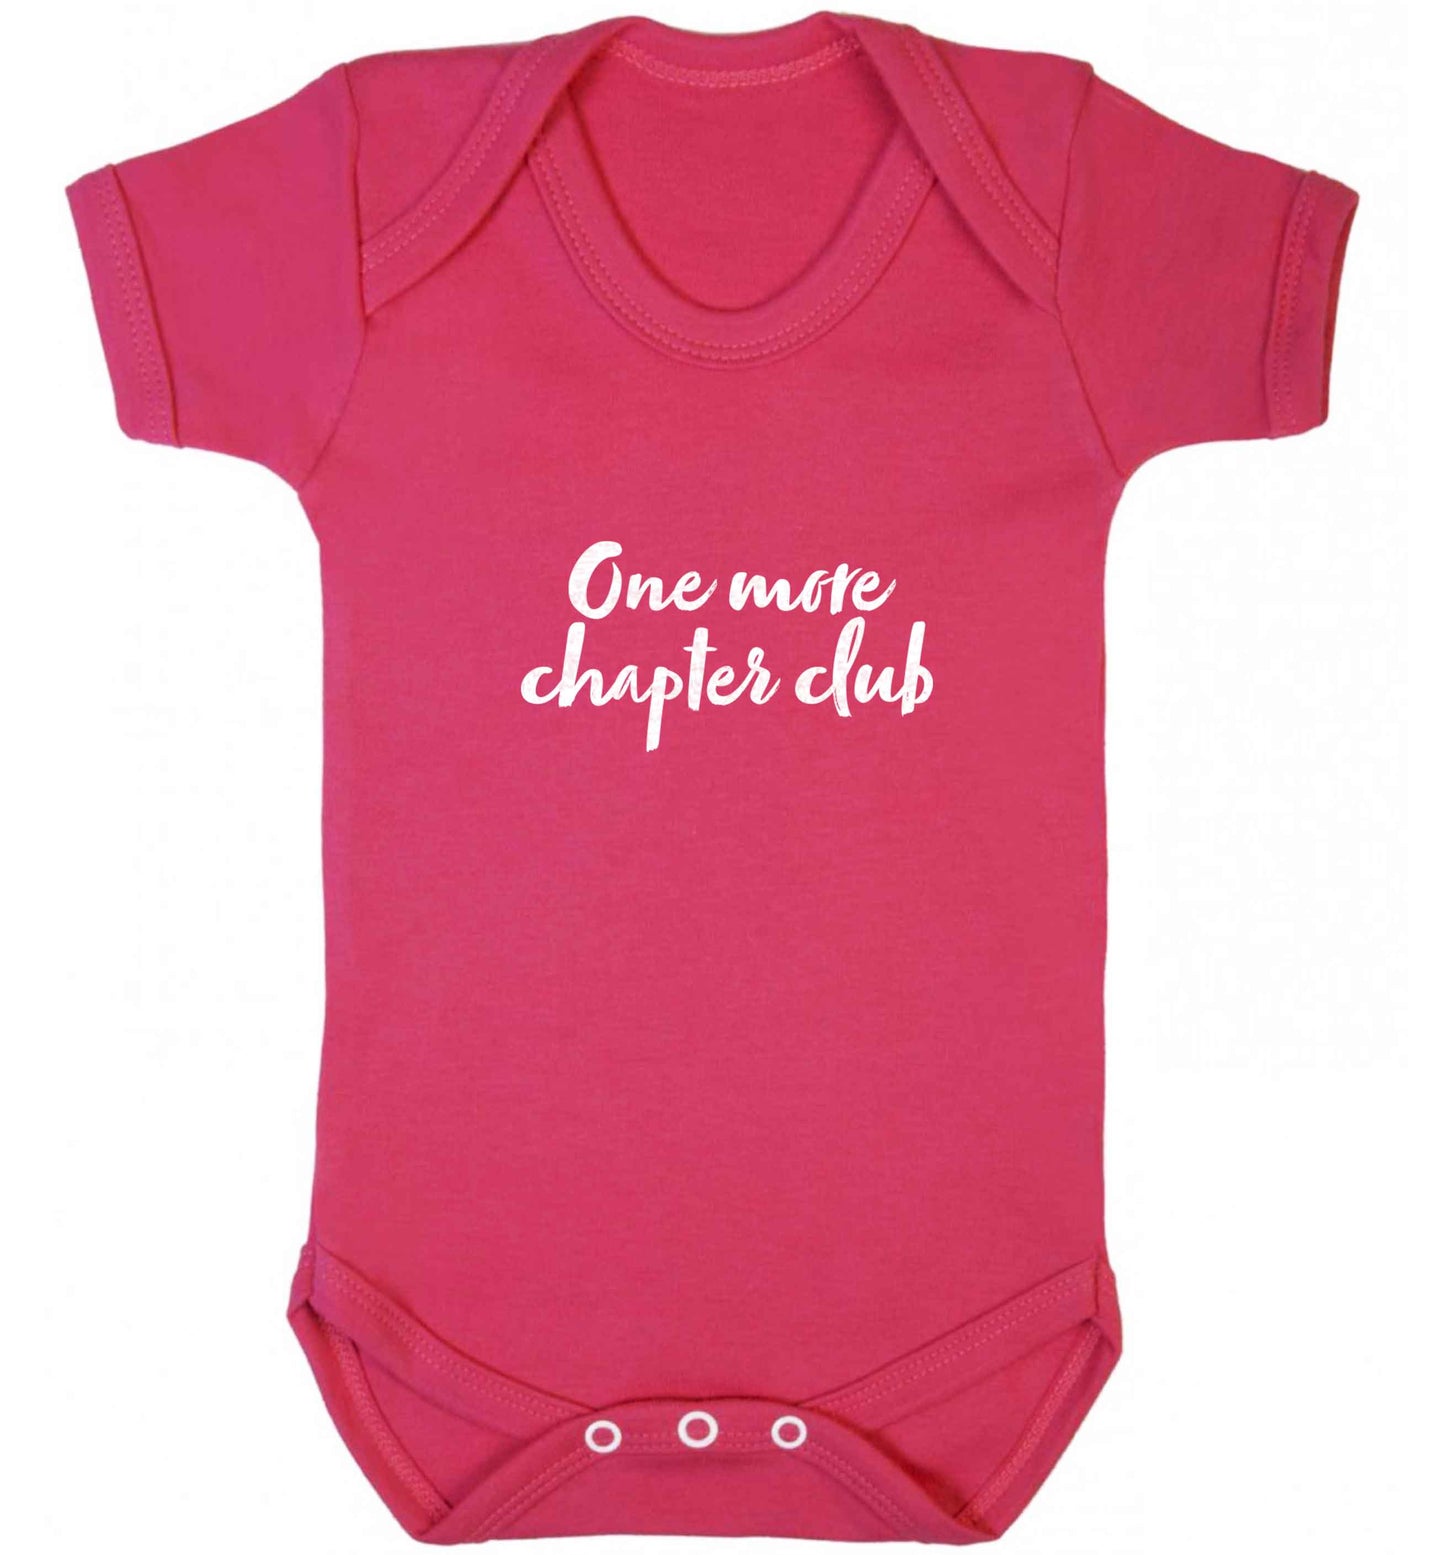 One more chapter club Kit baby vest dark pink 18-24 months